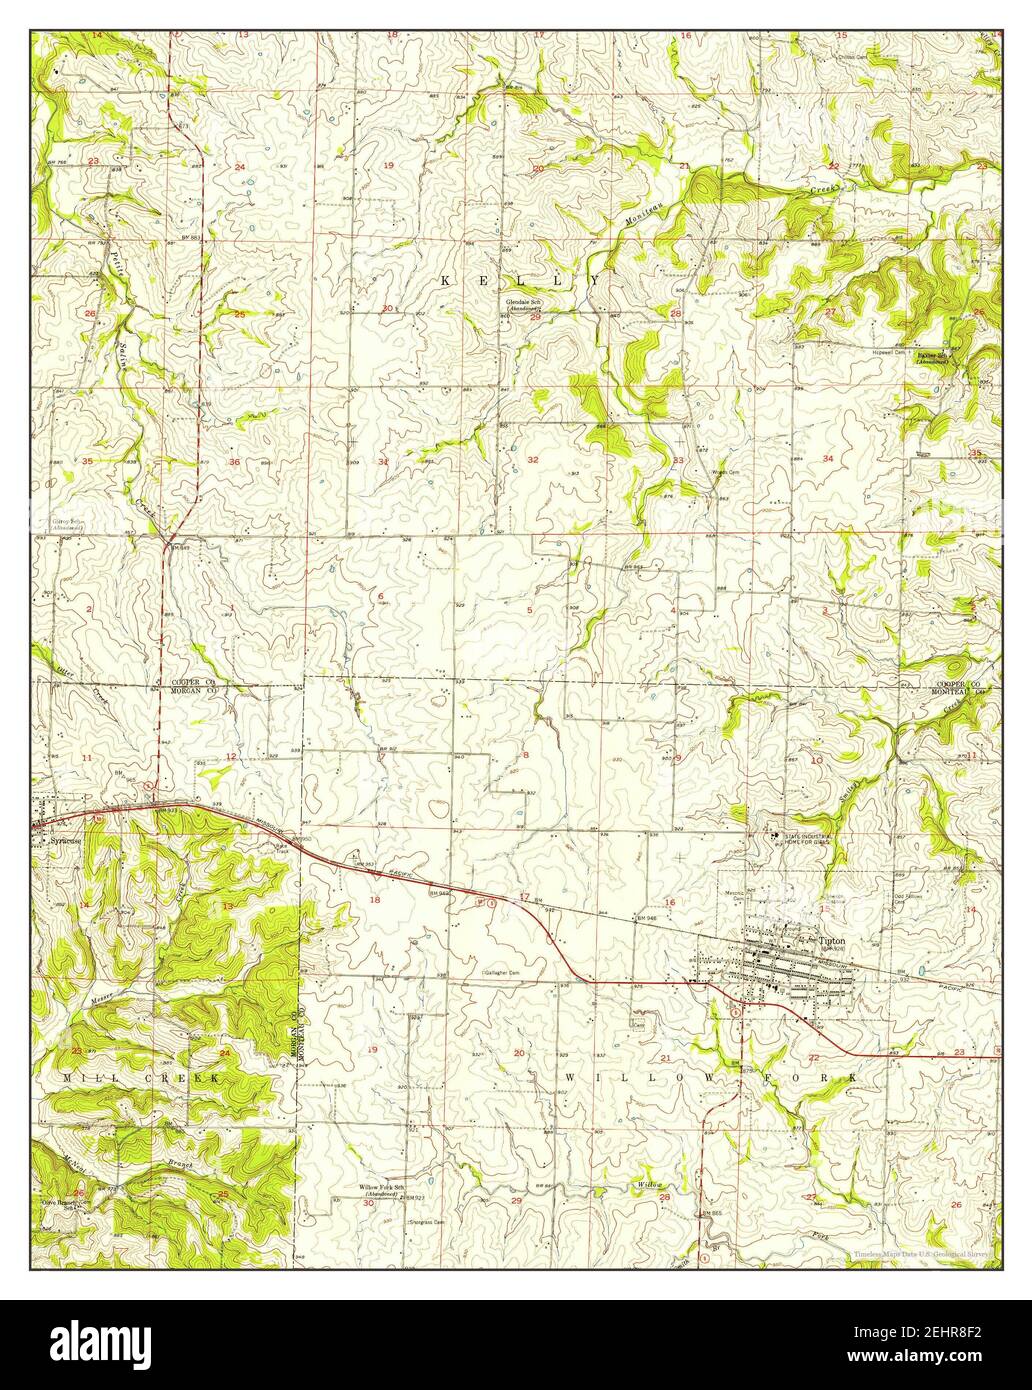 Tipton, Missouri, map 1952, 1:24000, United States of America by Timeless Maps, data U.S. Geological Survey Foto Stock